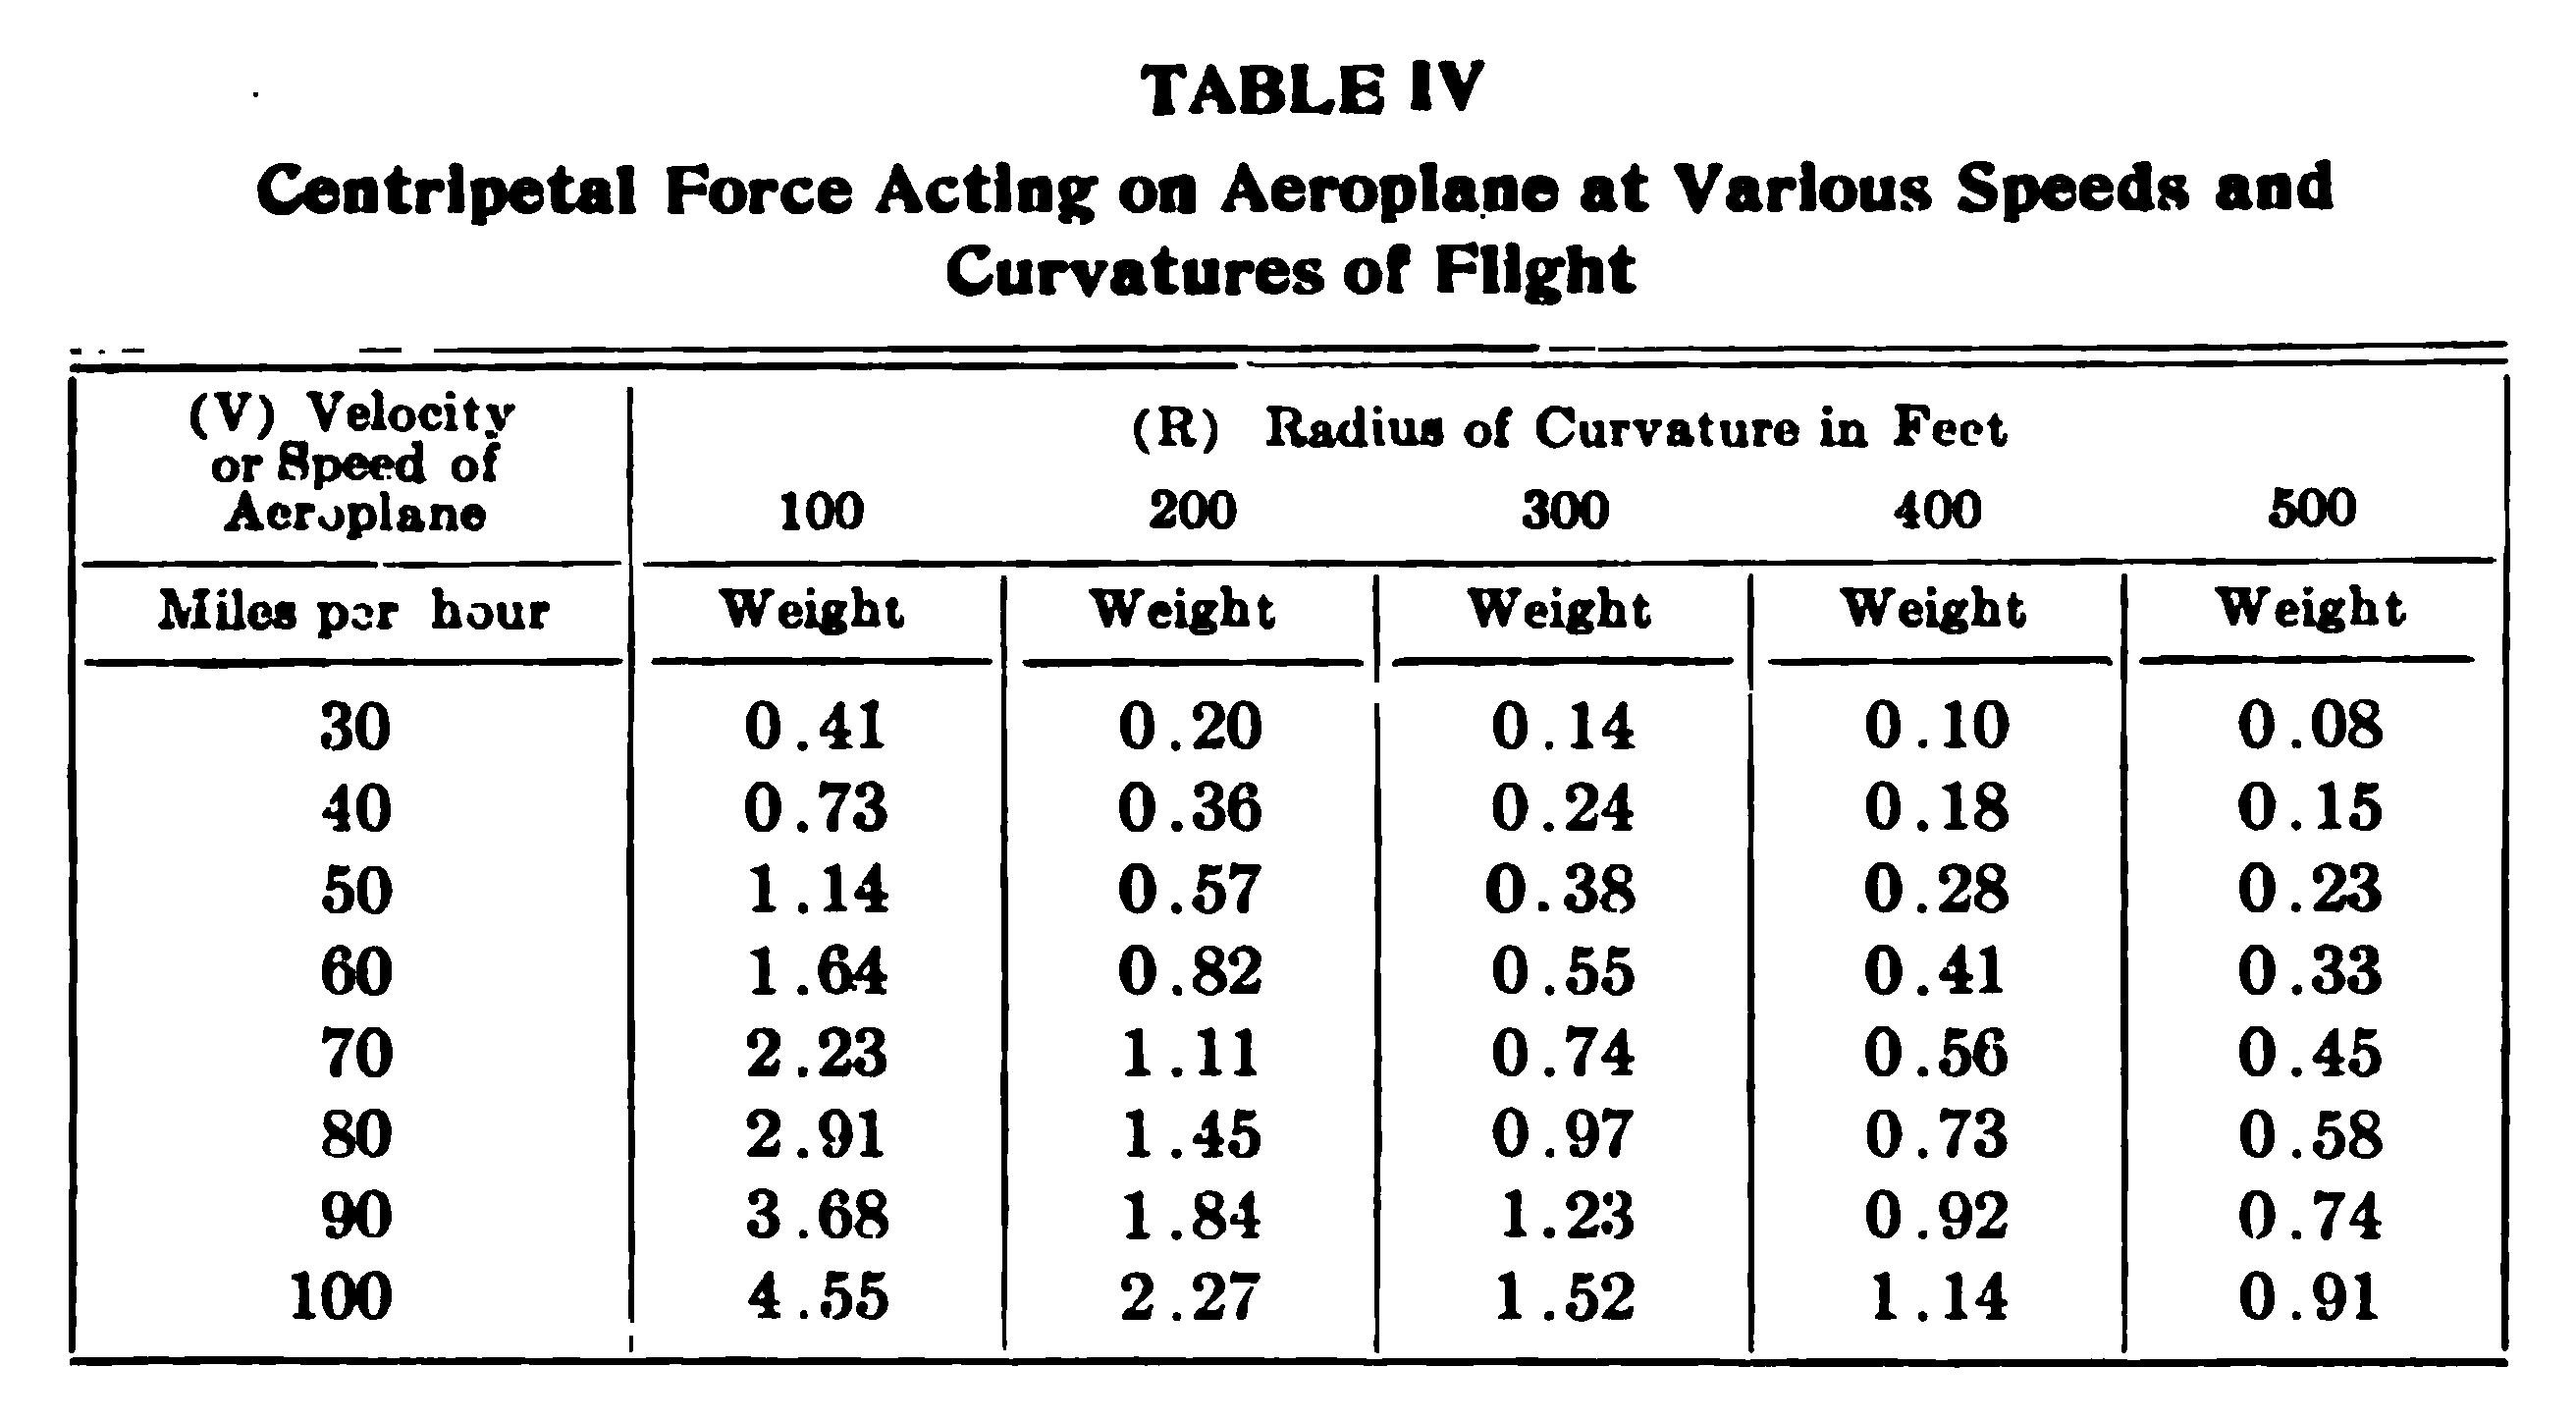 Fig. TABLE IV. Centripetal Force Acting on Aeroplane at Various Speeds and Curvatures of Flight